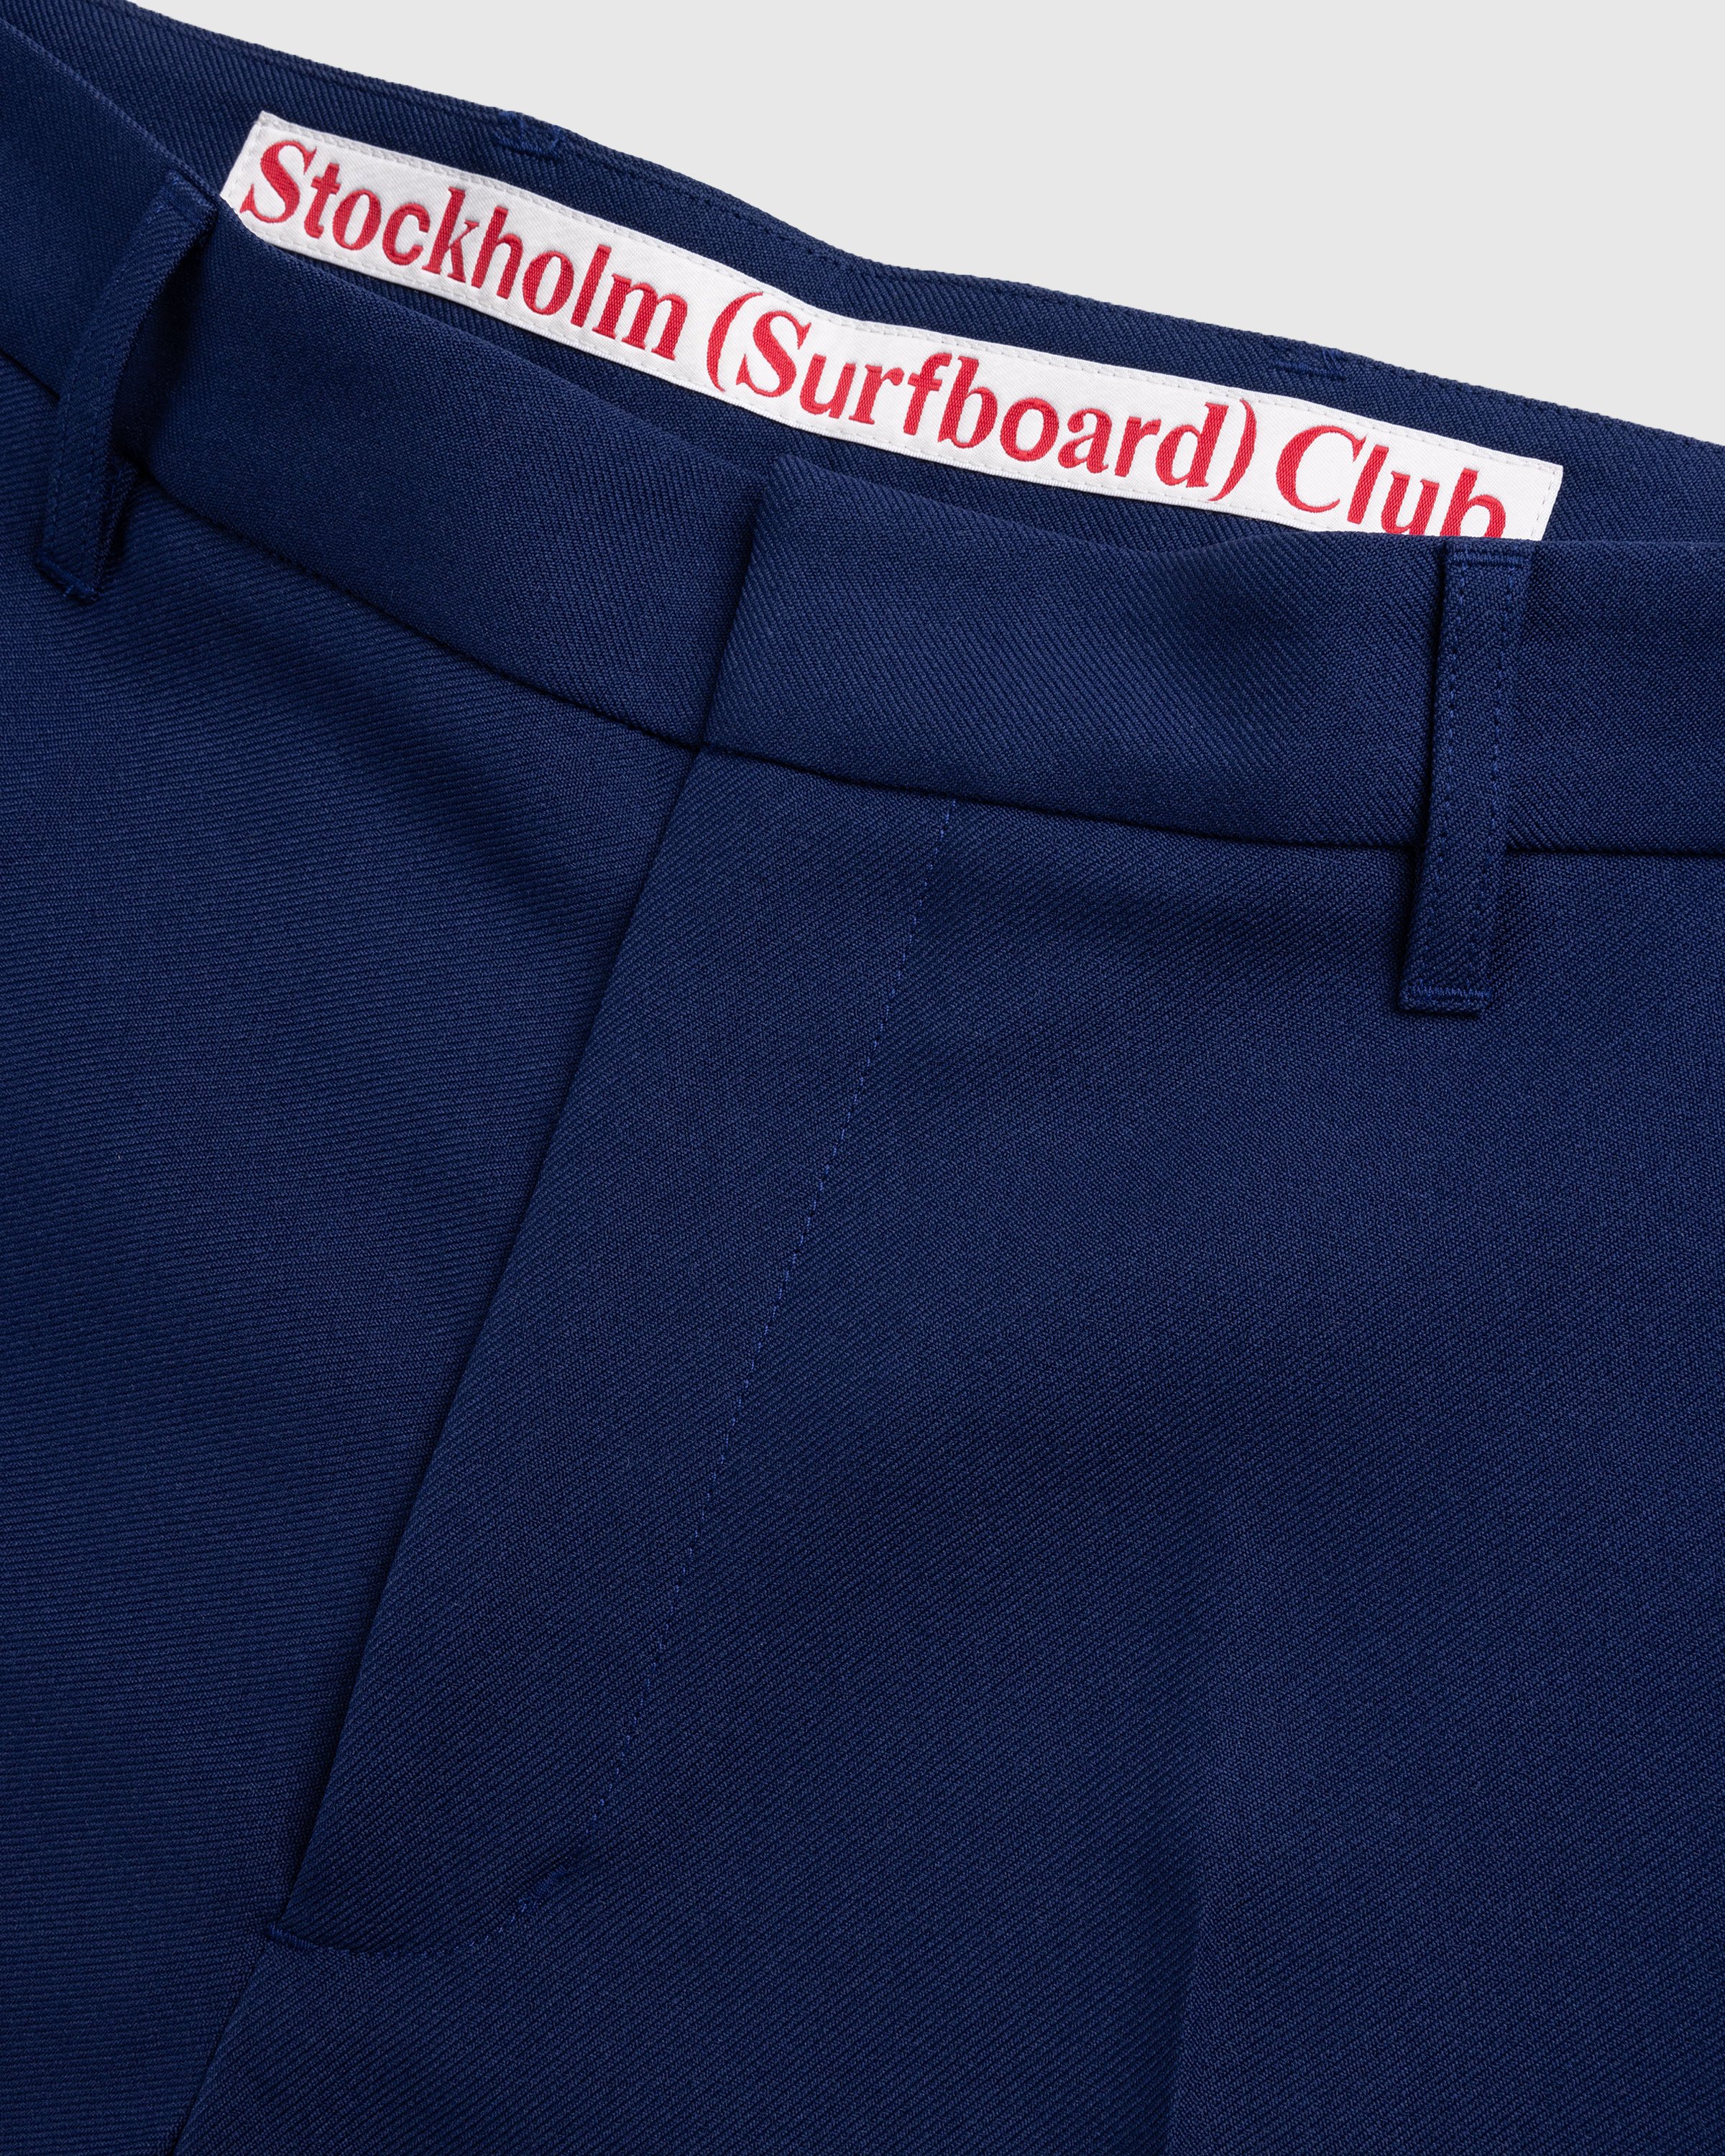 Stockholm Surfboard Club - Sune Ulster Navy Blue - Clothing - Blue - Image 7